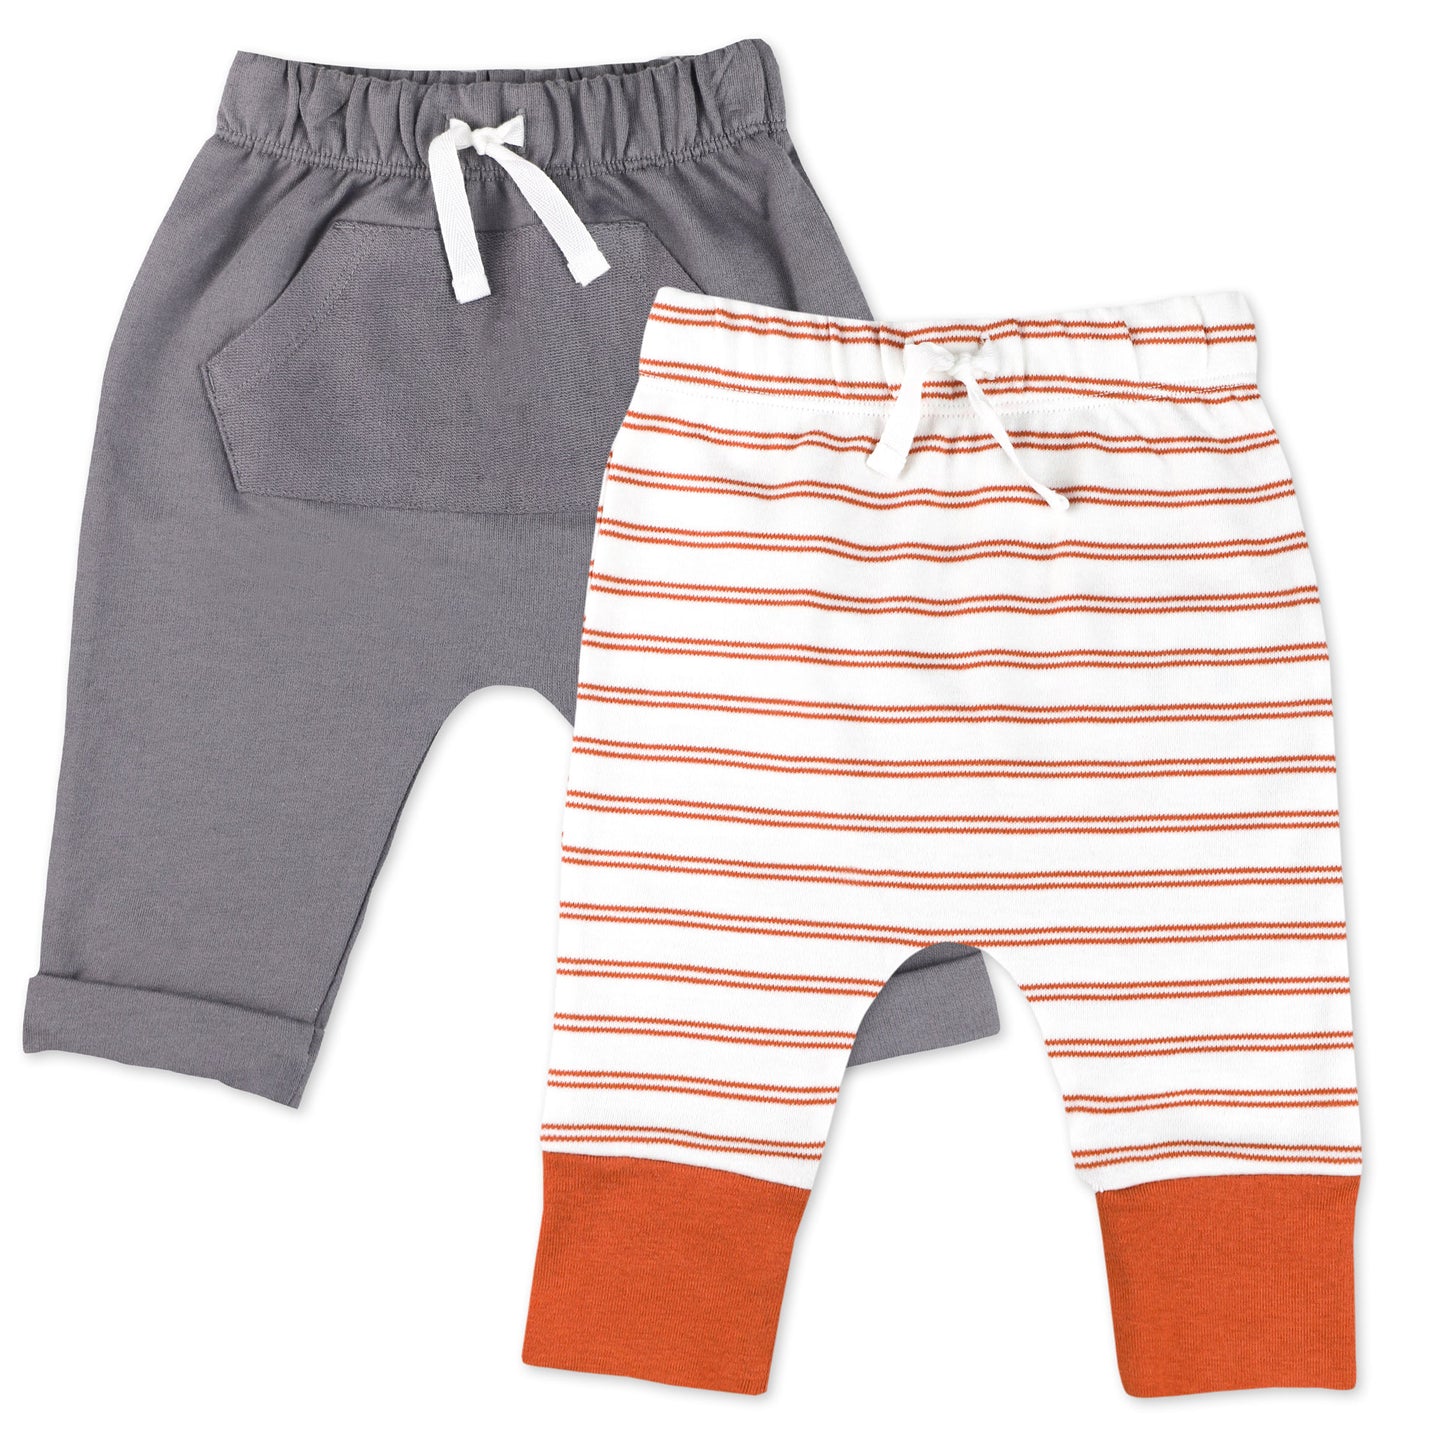 Organic Cotton 2-Pack Pant in Furry Friends Print